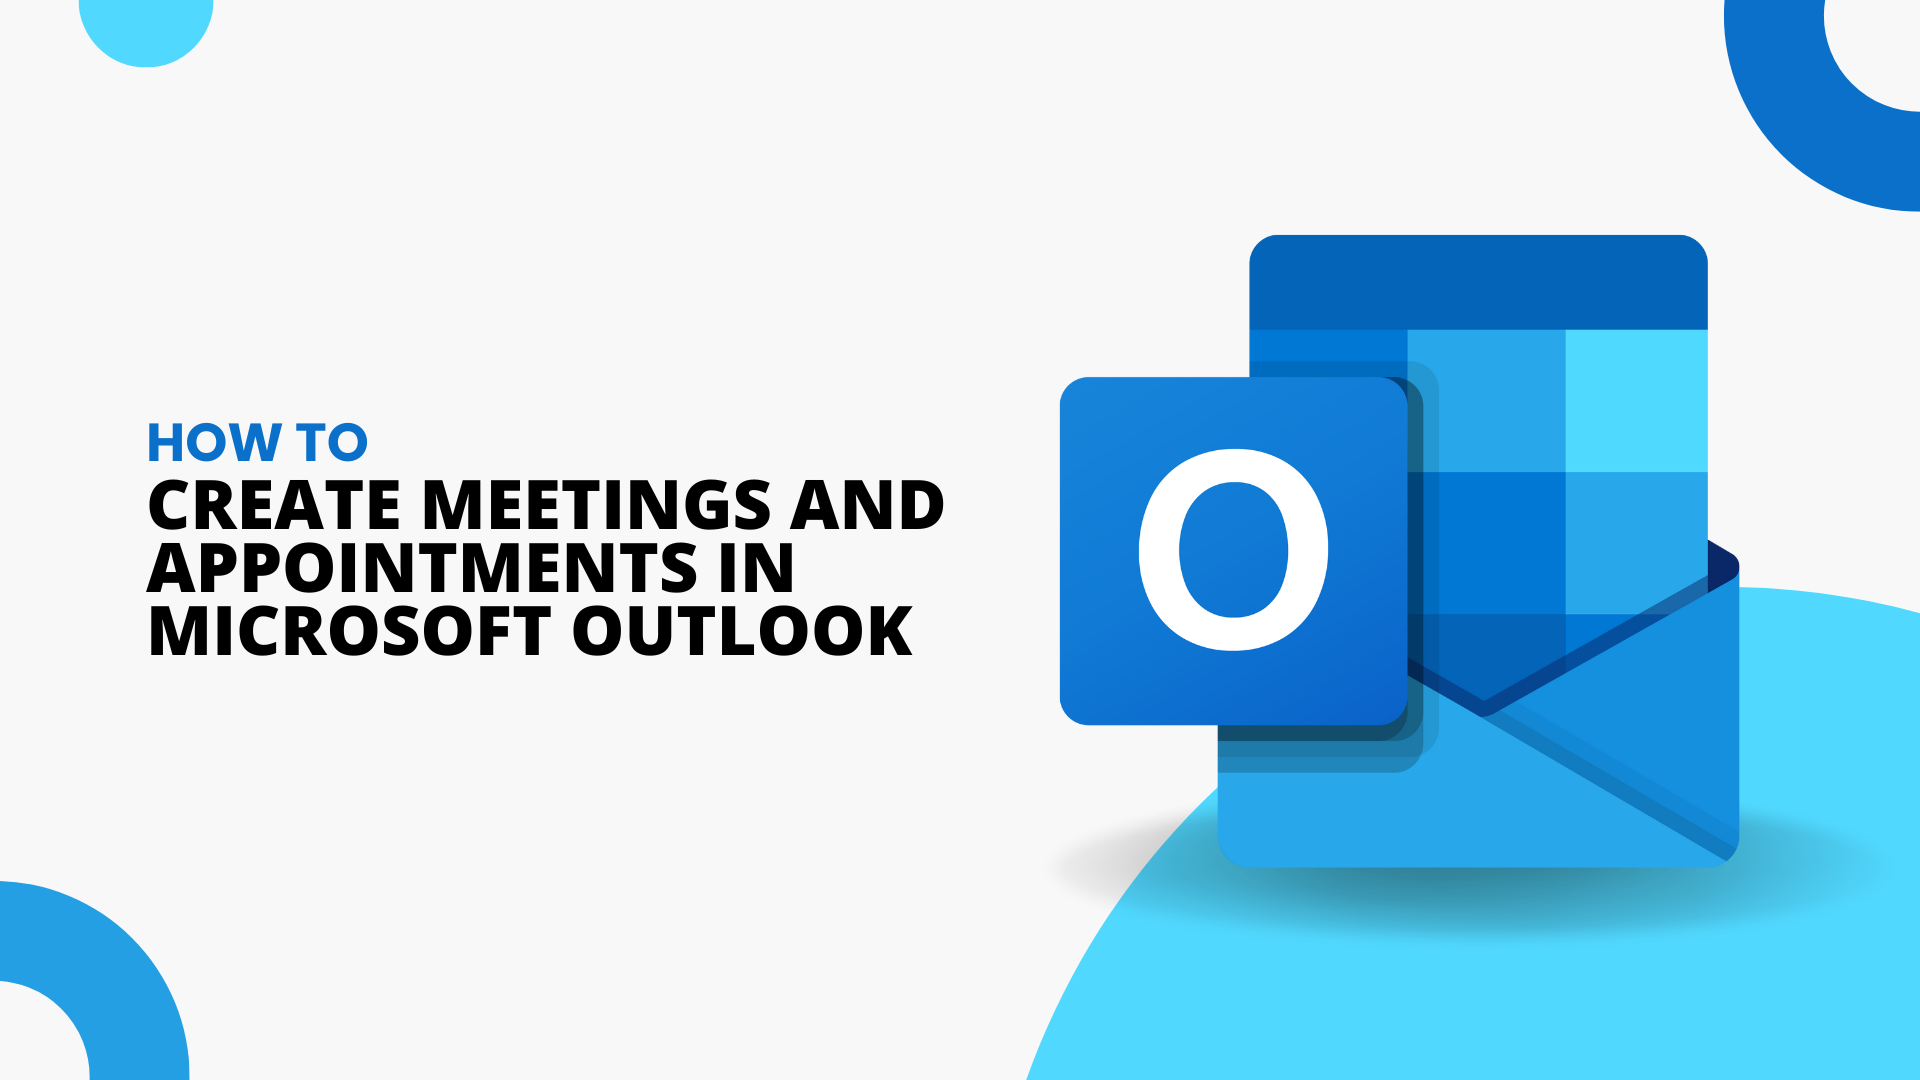 How To Create Meetings and Appointments in Microsoft Outlook